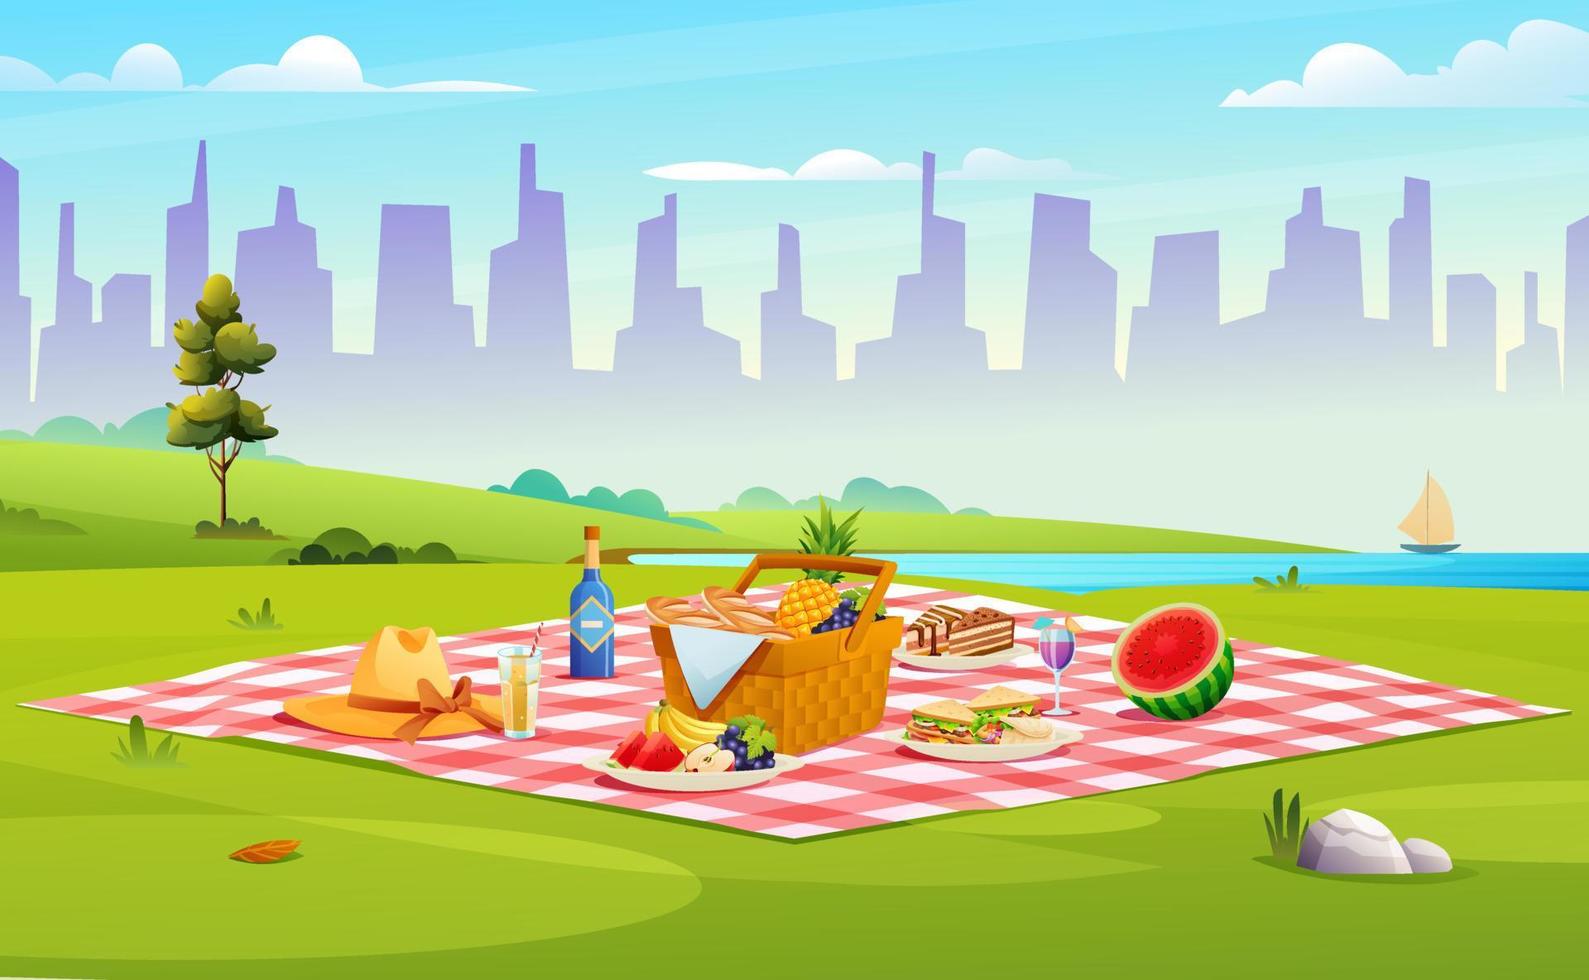 Picnic setup composed of basket with food, fruits, sandwiches in the park vector illustration